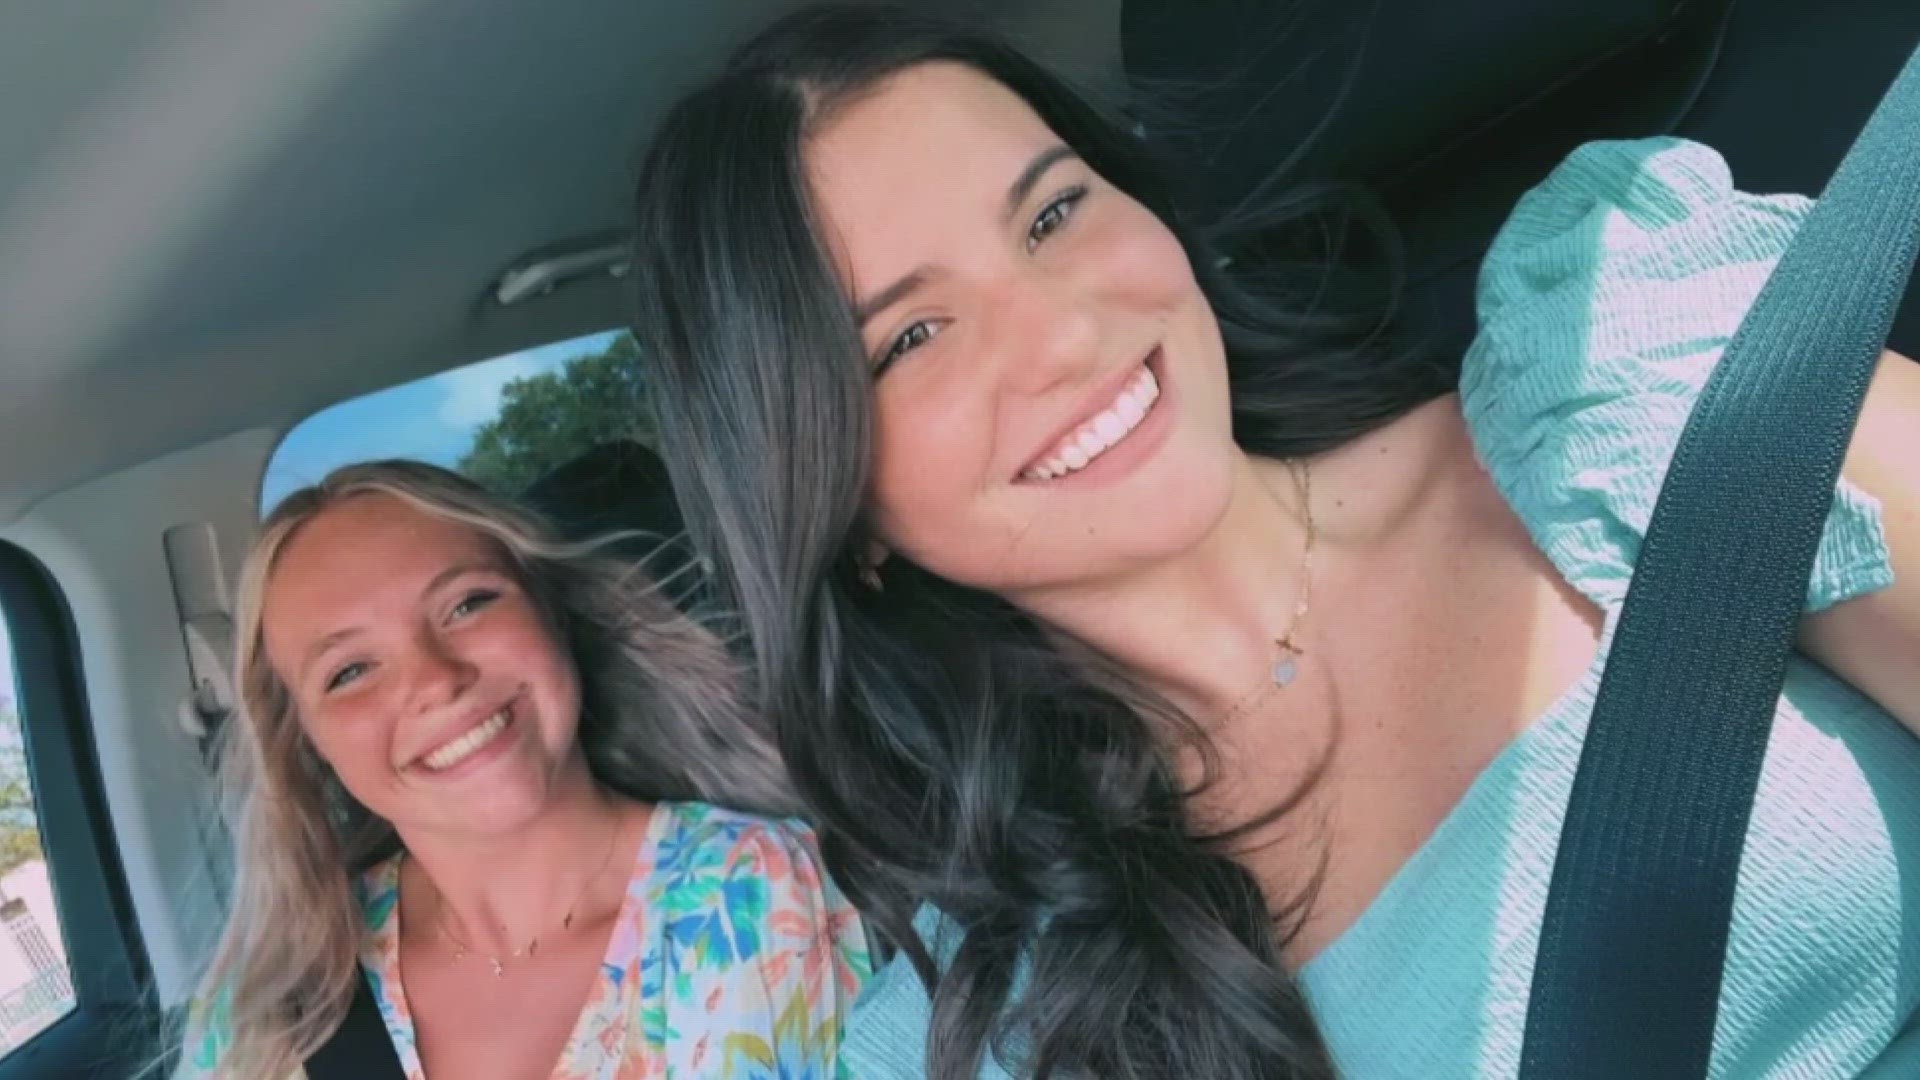 16-year-old Baylee Holbrook passed away Thursday morning at 9:32 a.m., a family friend tells First Coast News. She was struck by lightning Tuesday while hunting.